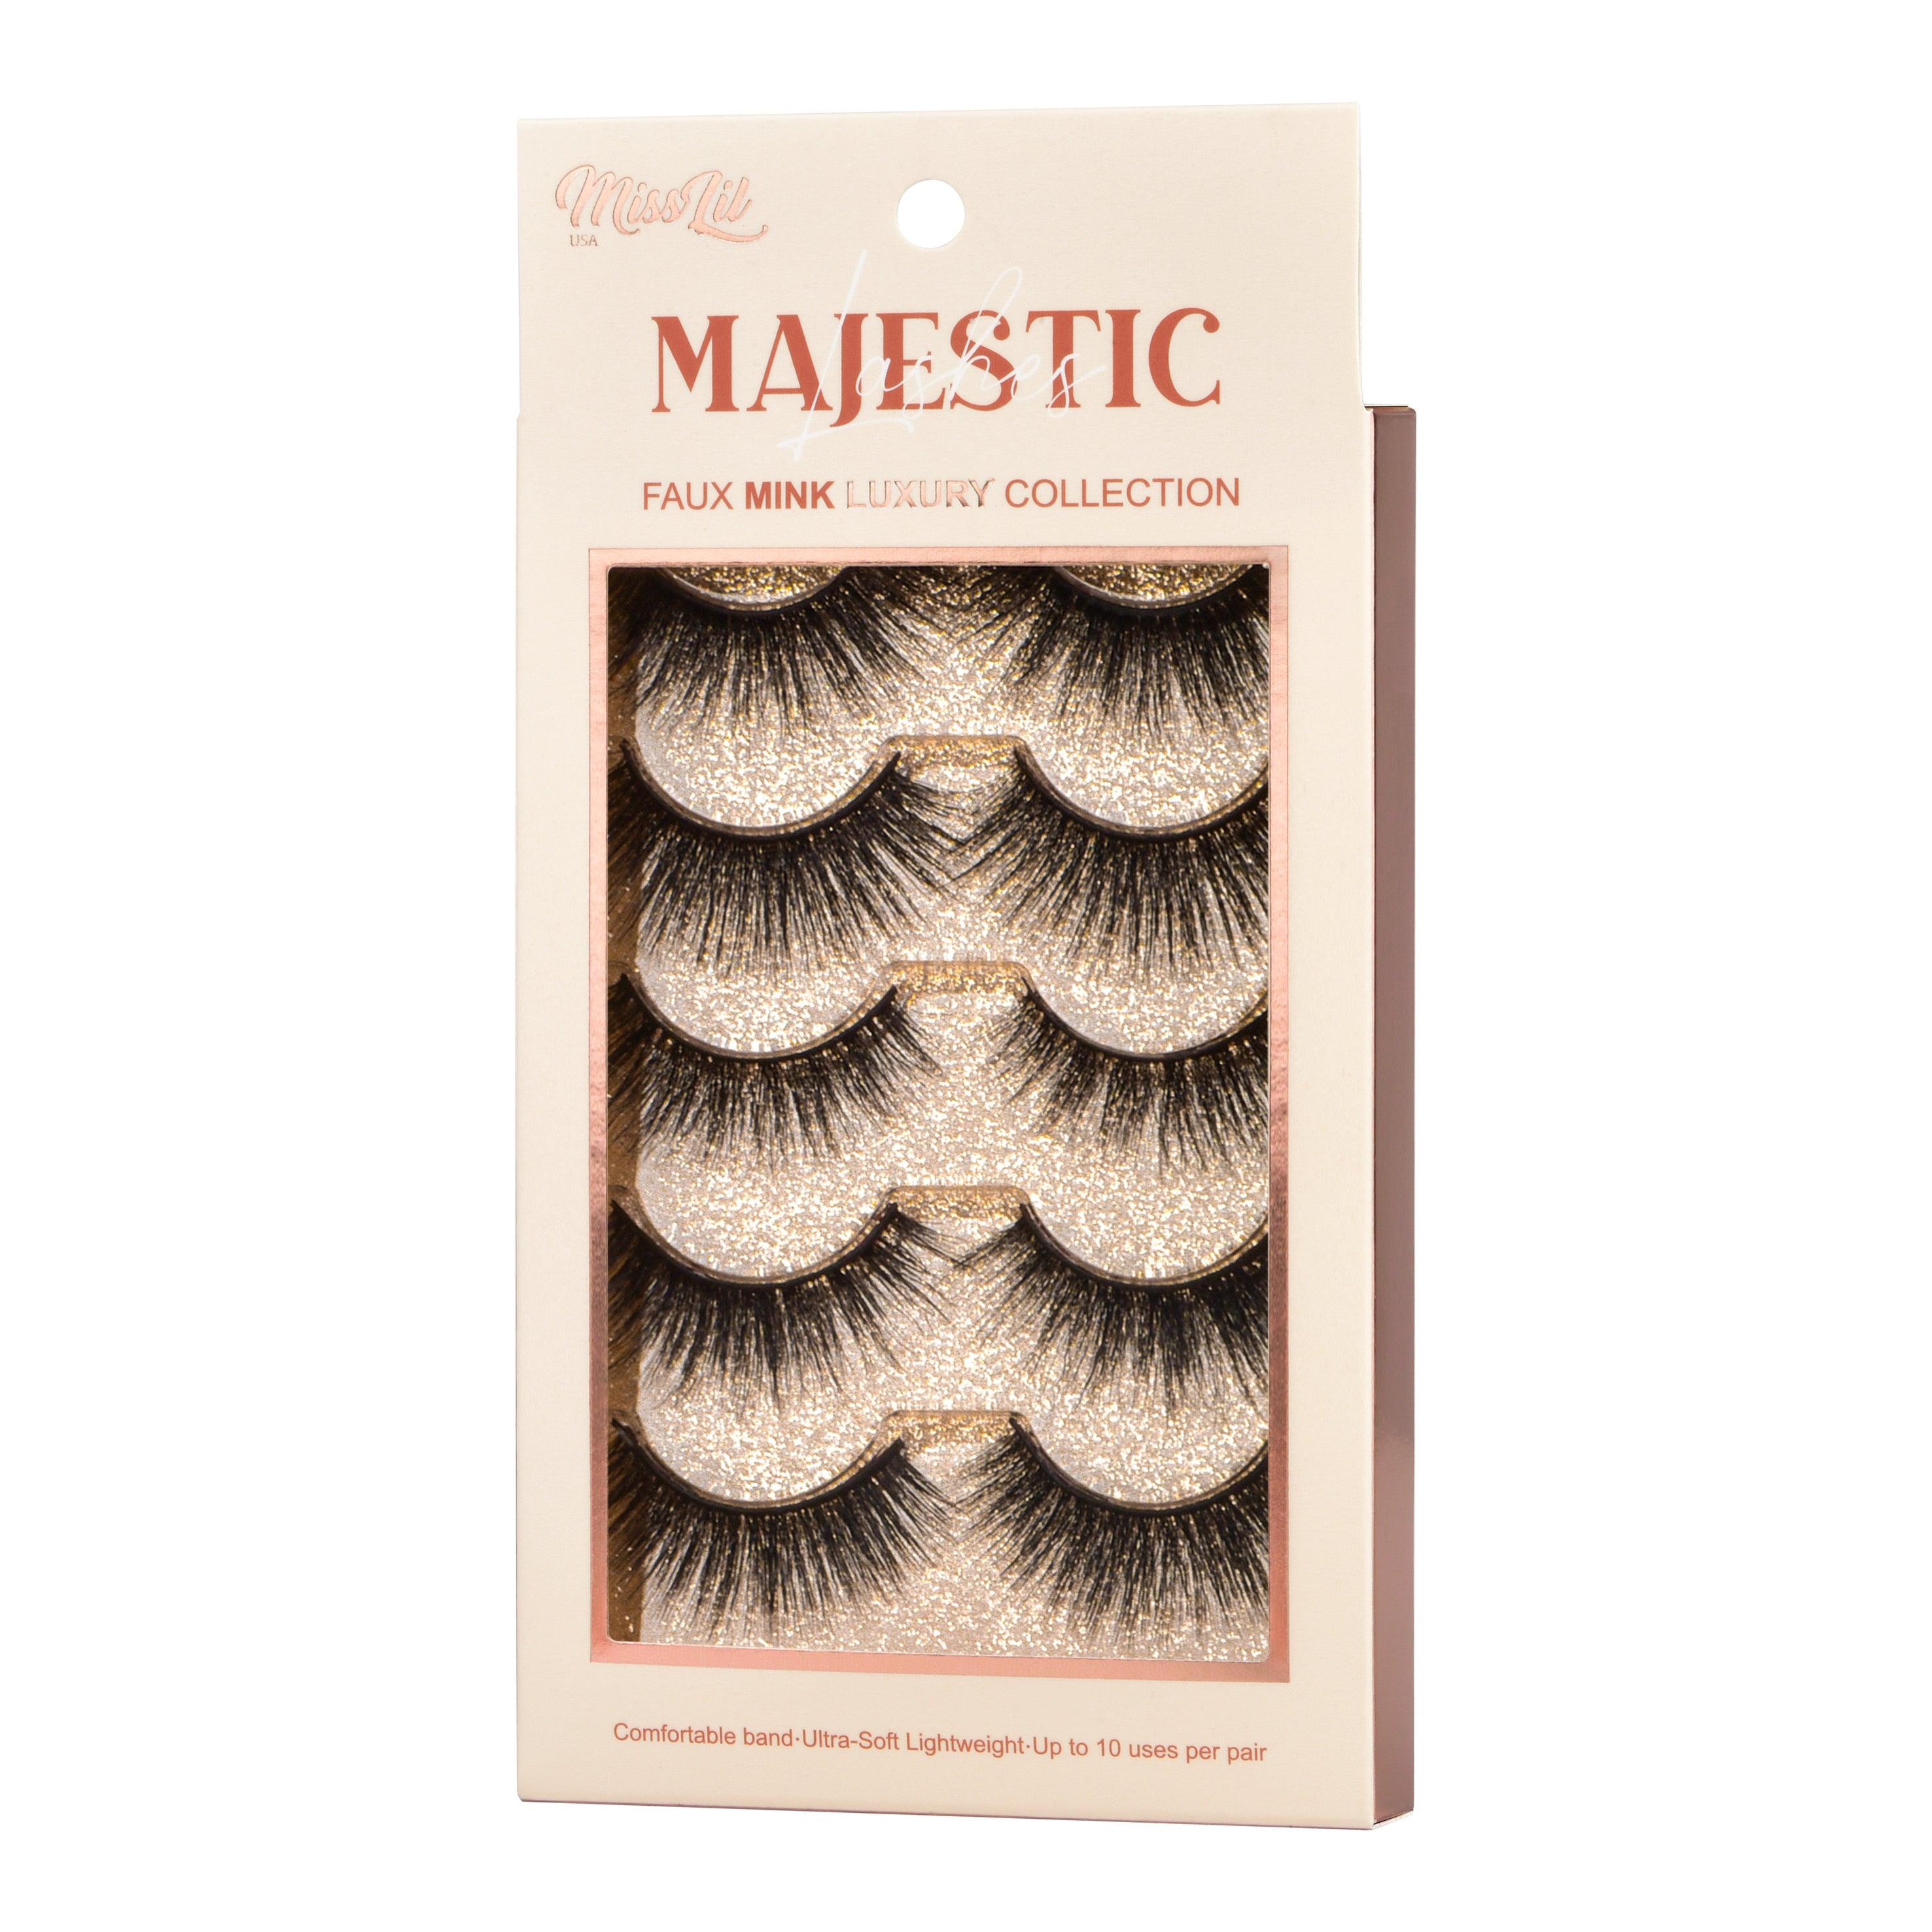 5 Pairs Majestic Lashes #8 (Pack of 6) - Miss Lil USA Wholesale